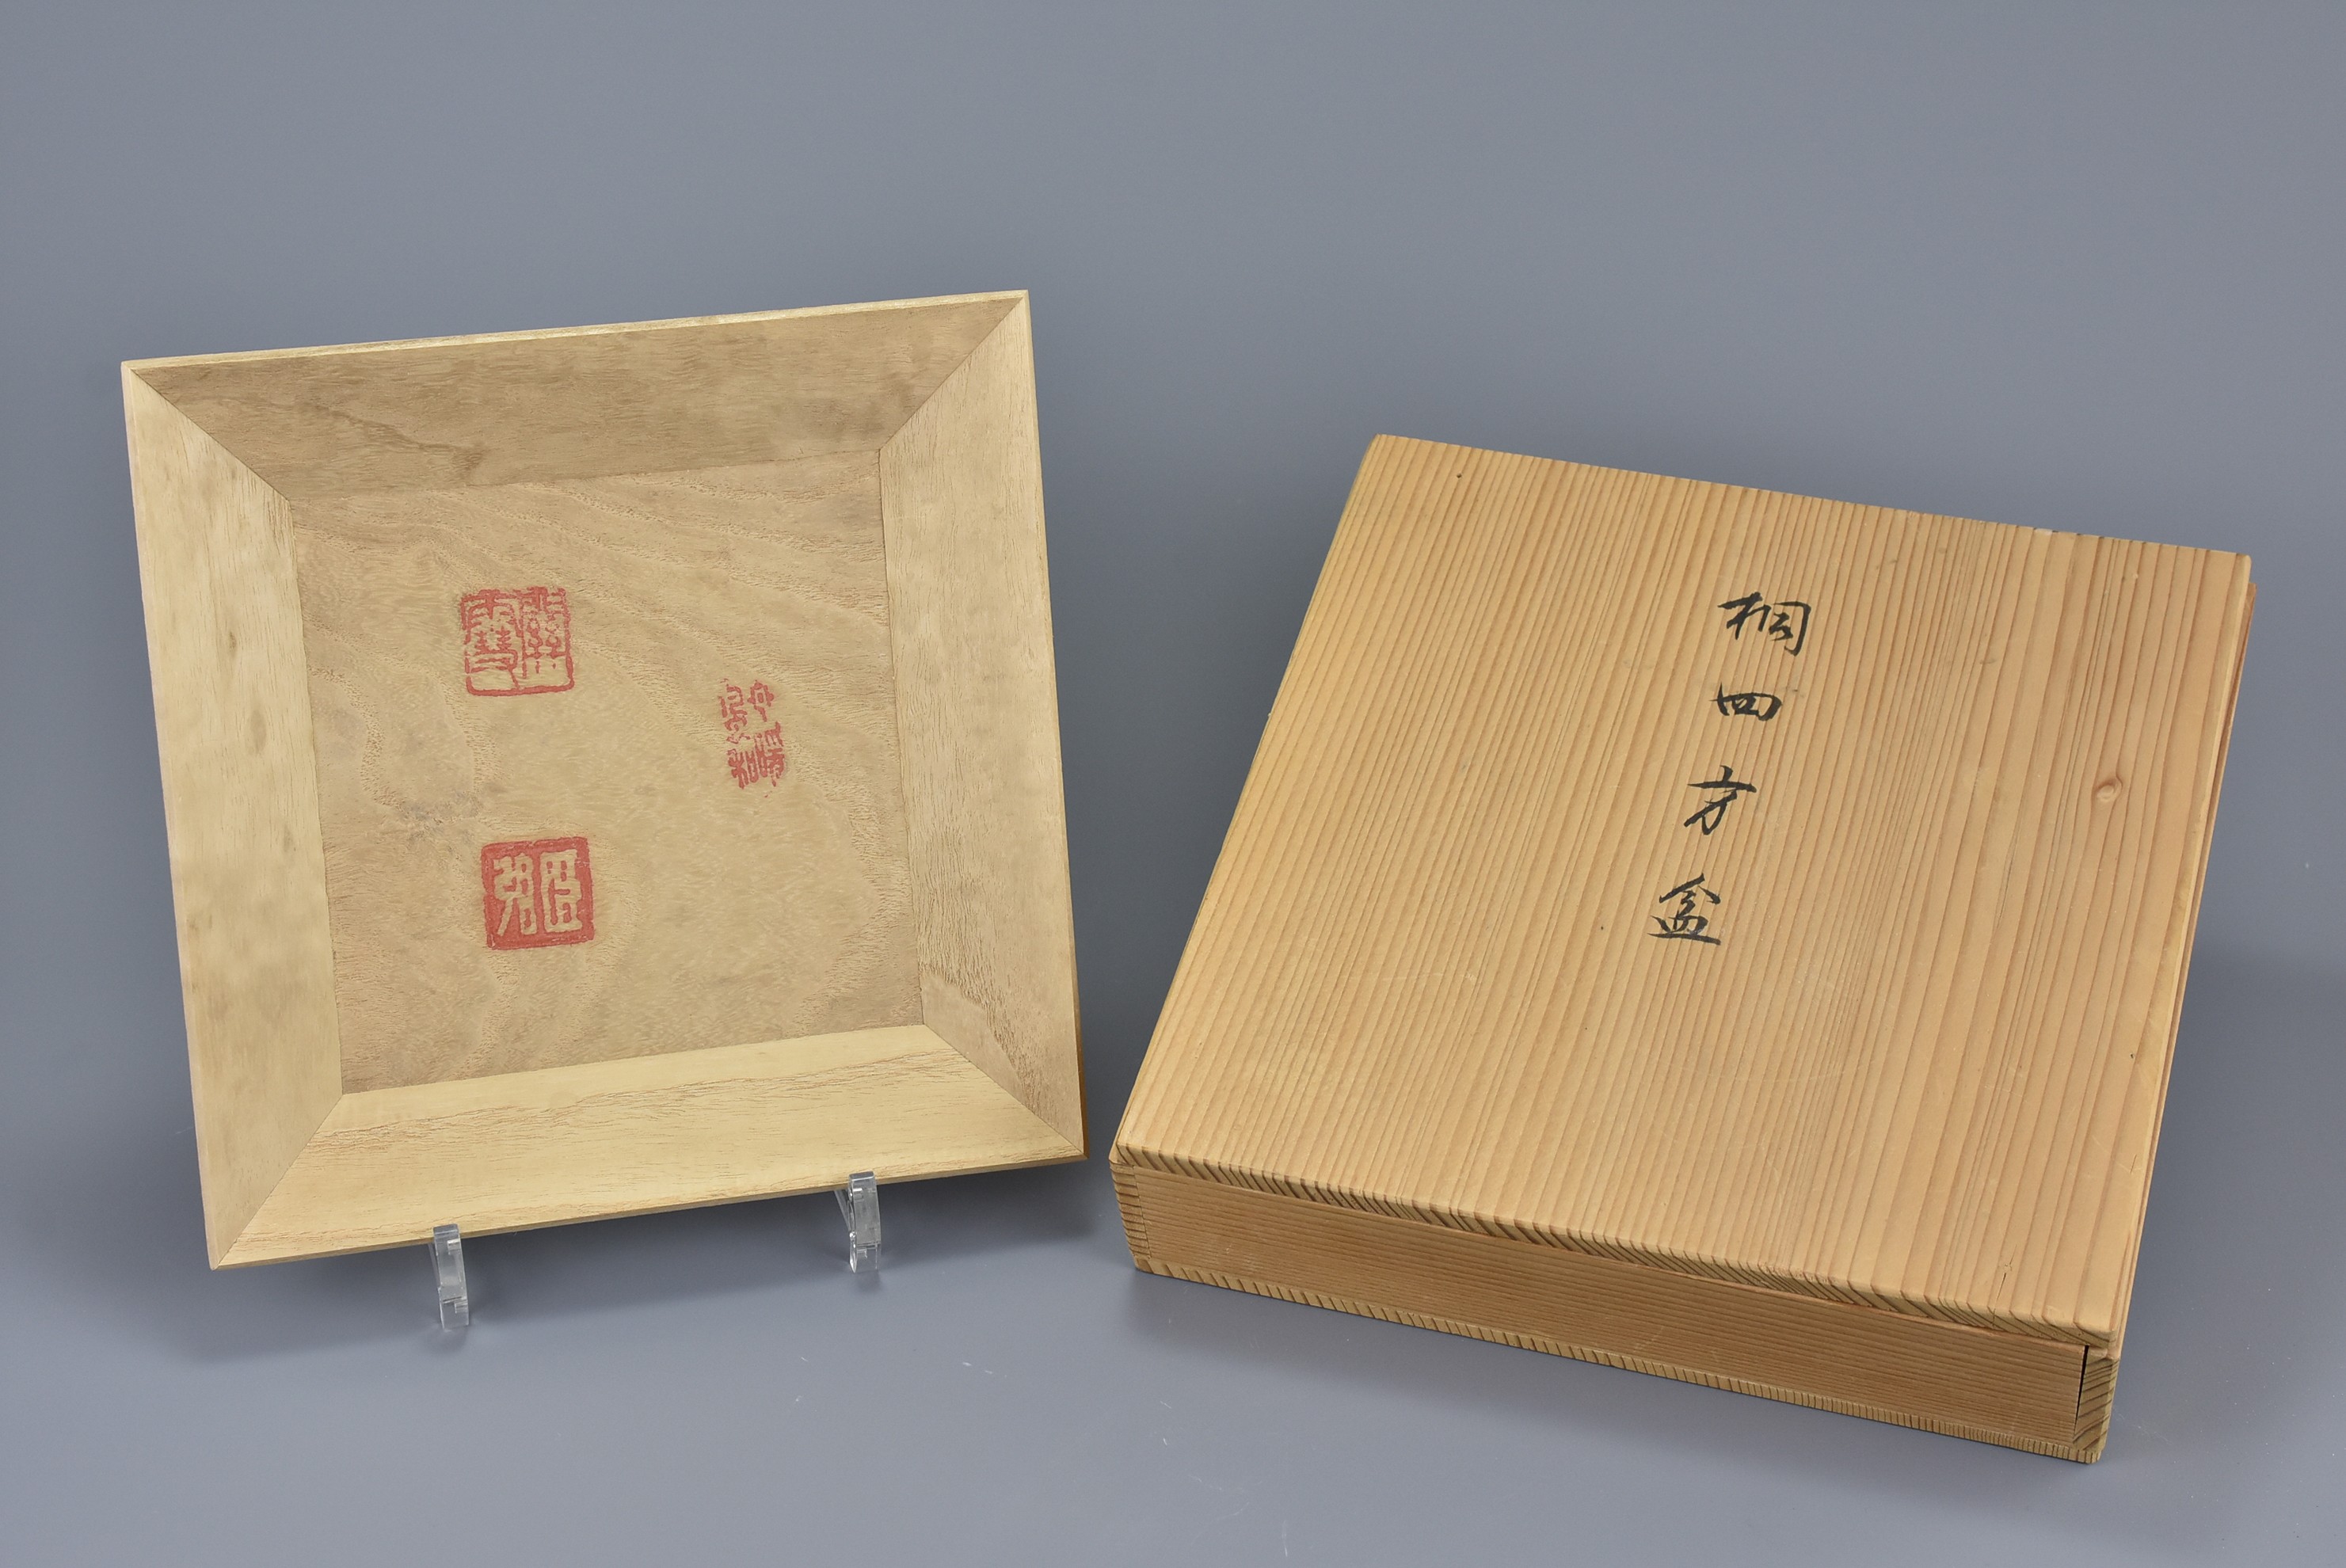 A Japanese Inscribed Wooden Paulownia Cake Tray in Fitted Box, Signed, 1950s - Image 2 of 6